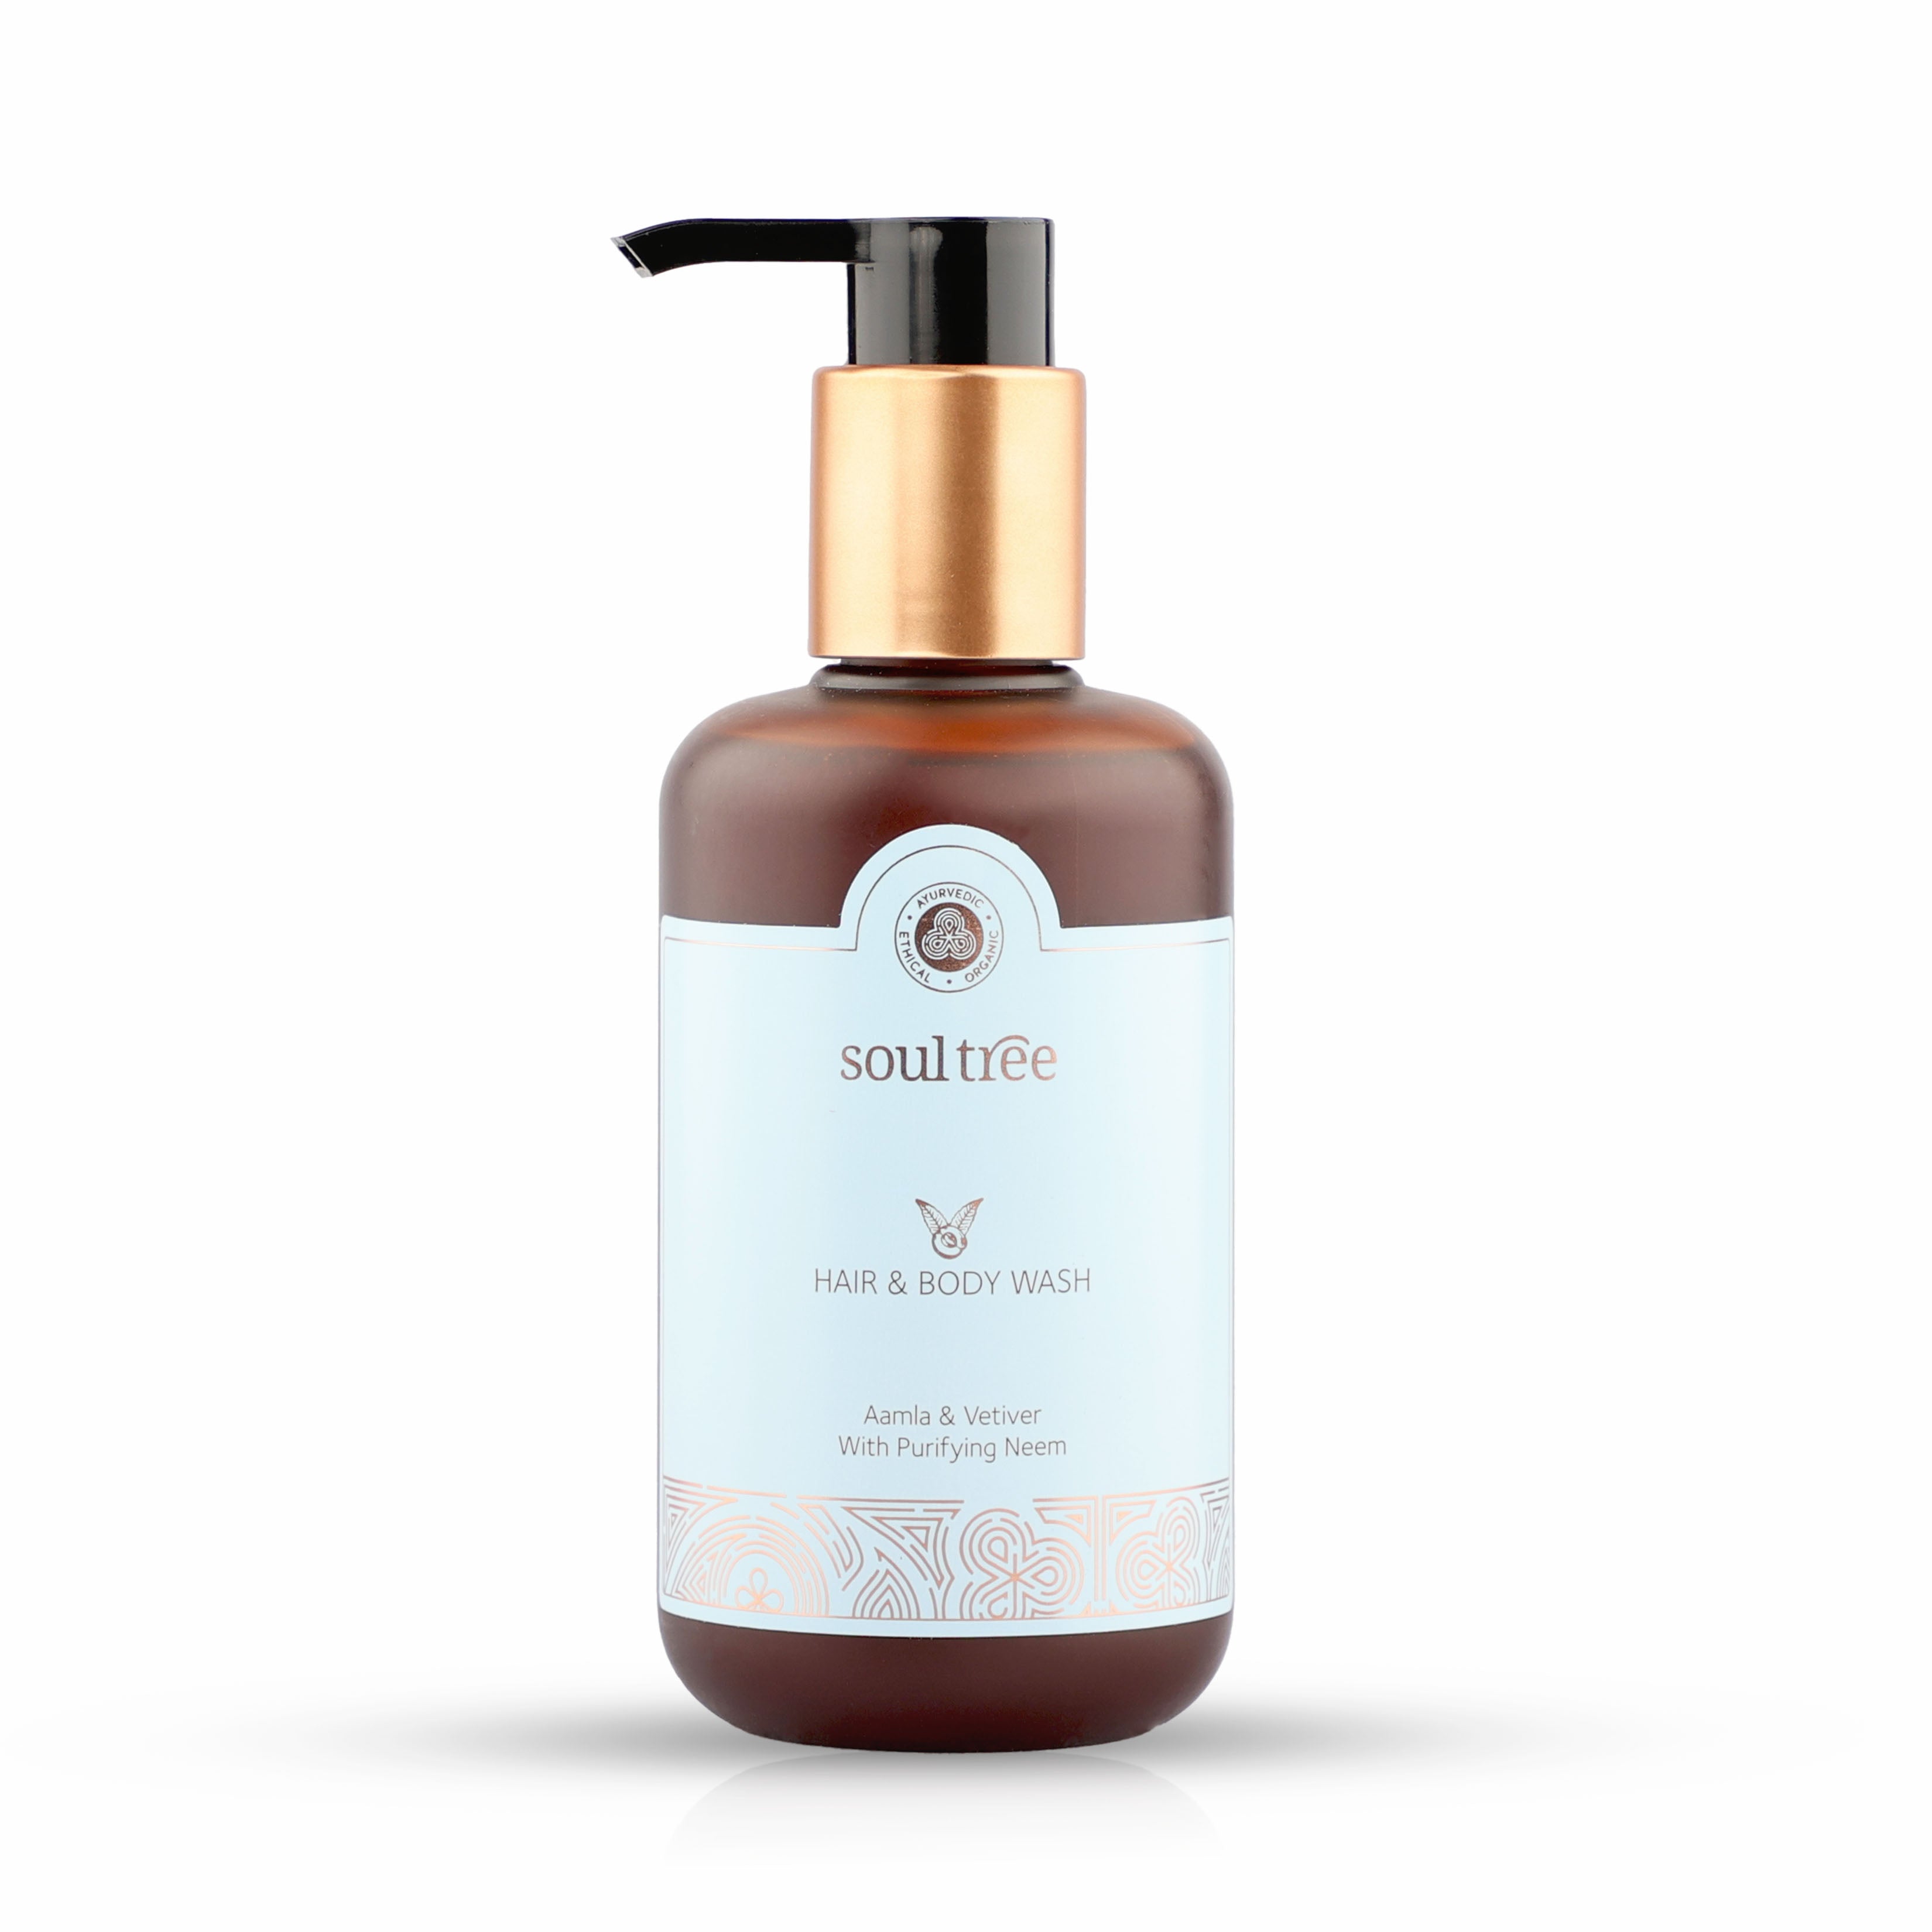 Hair & Body Wash - Aamla & Vetiver with Purifying Neem